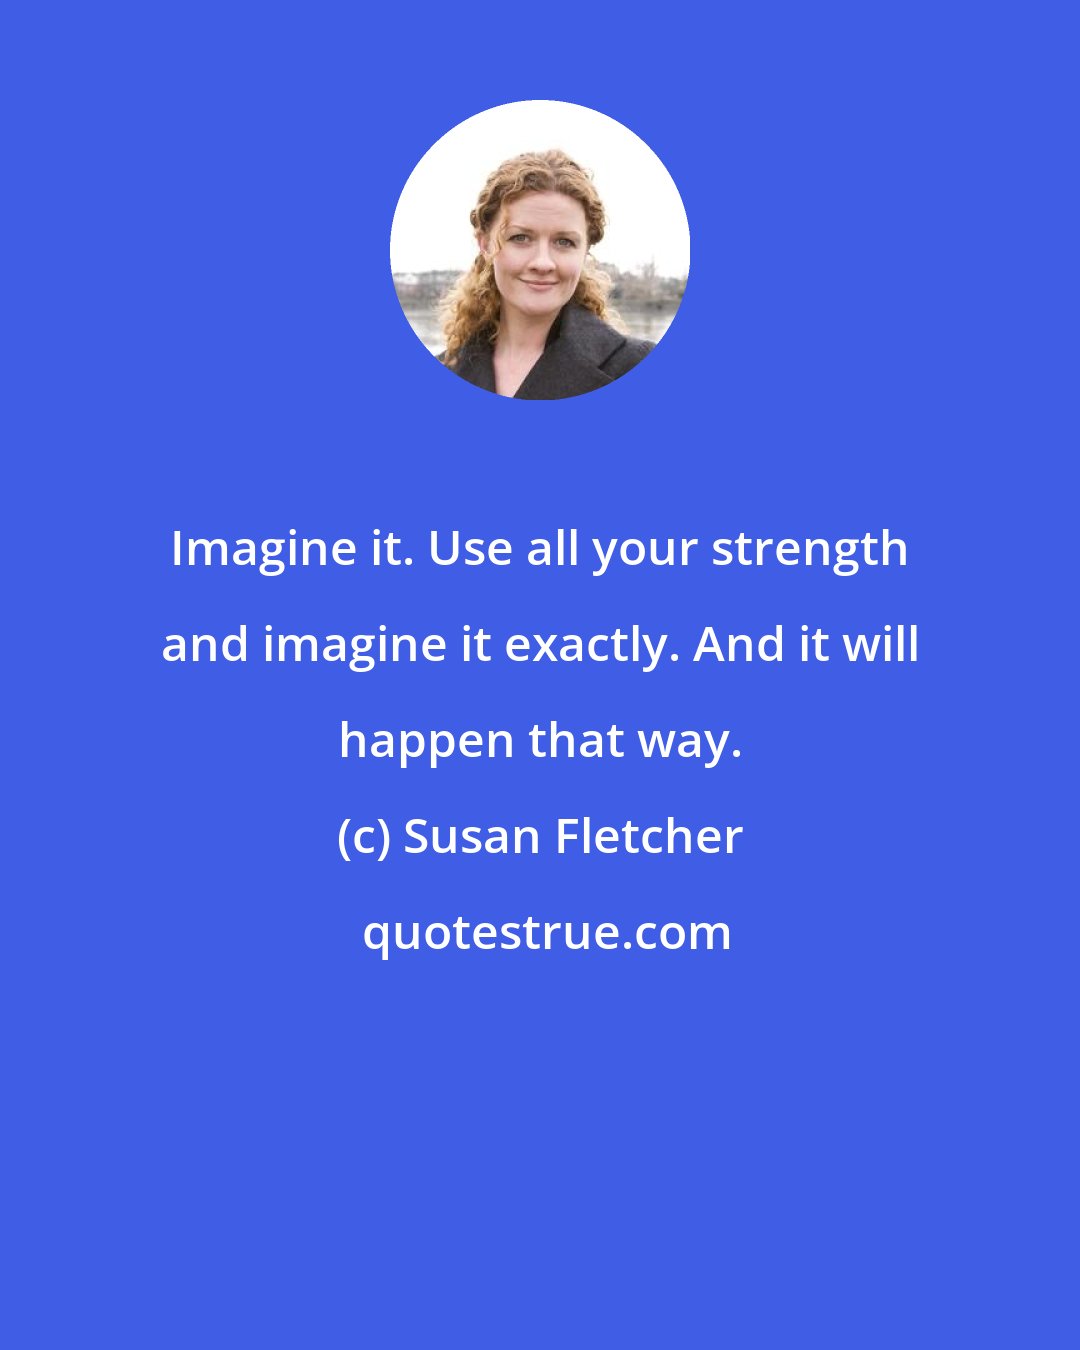 Susan Fletcher: Imagine it. Use all your strength and imagine it exactly. And it will happen that way.